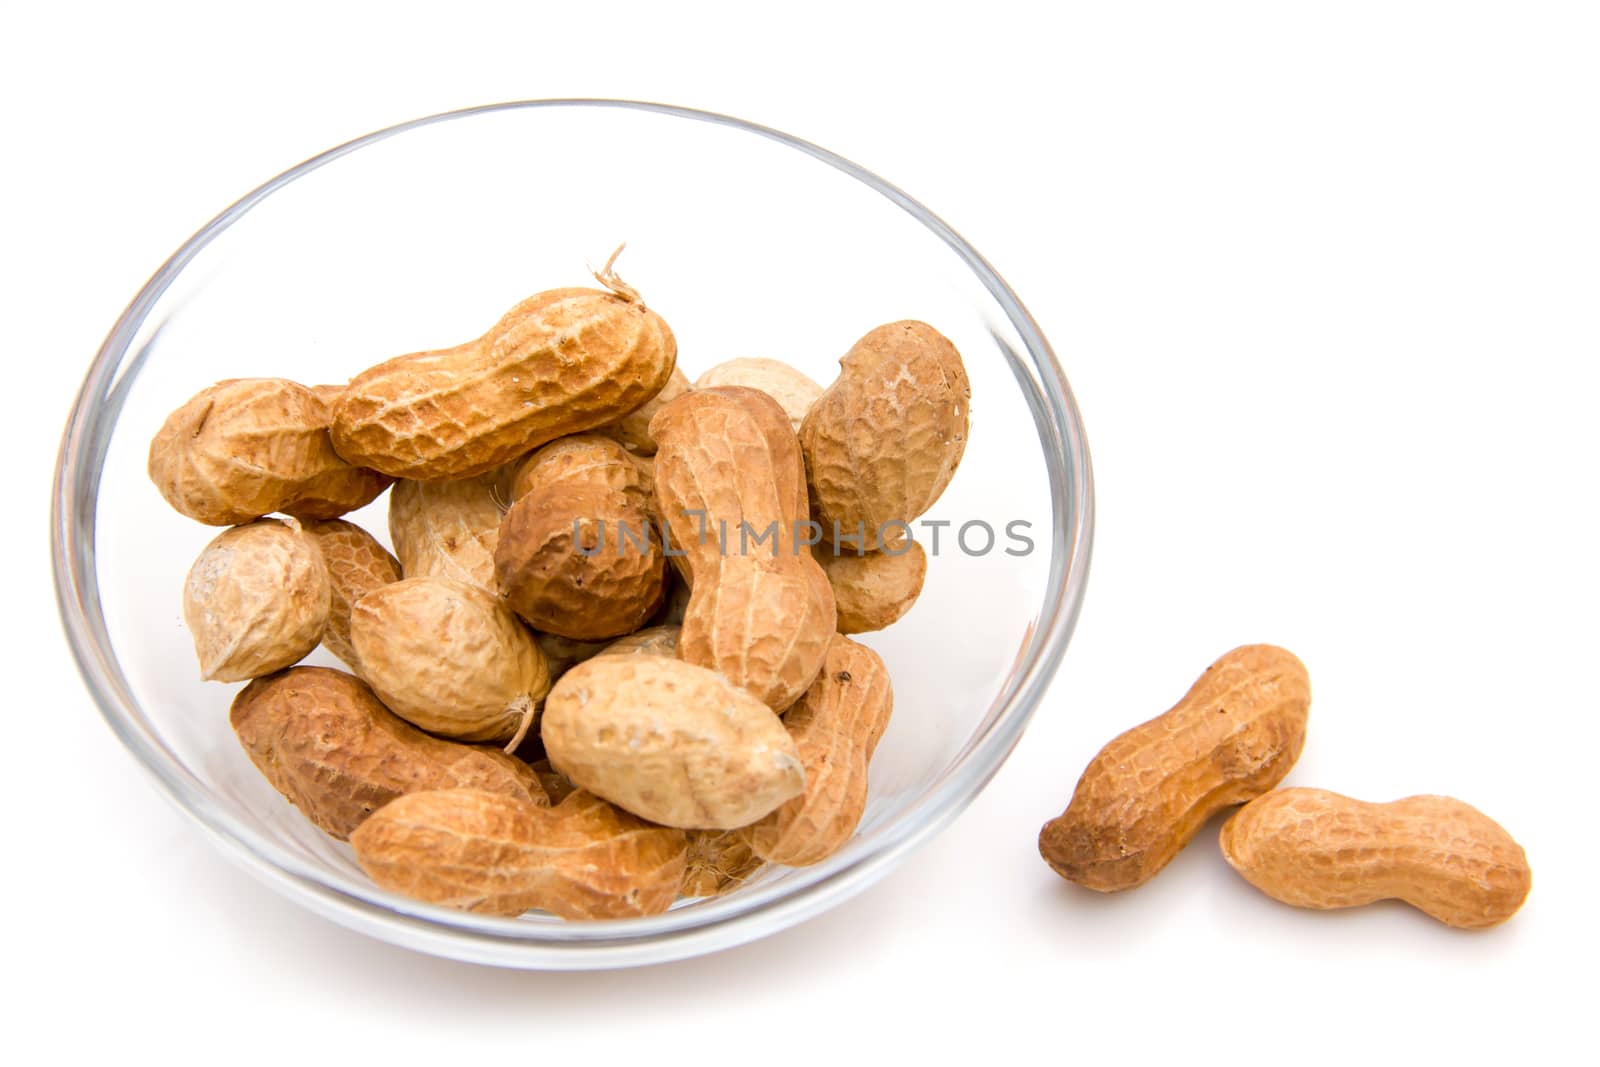 Peanuts on glass bowl on white background